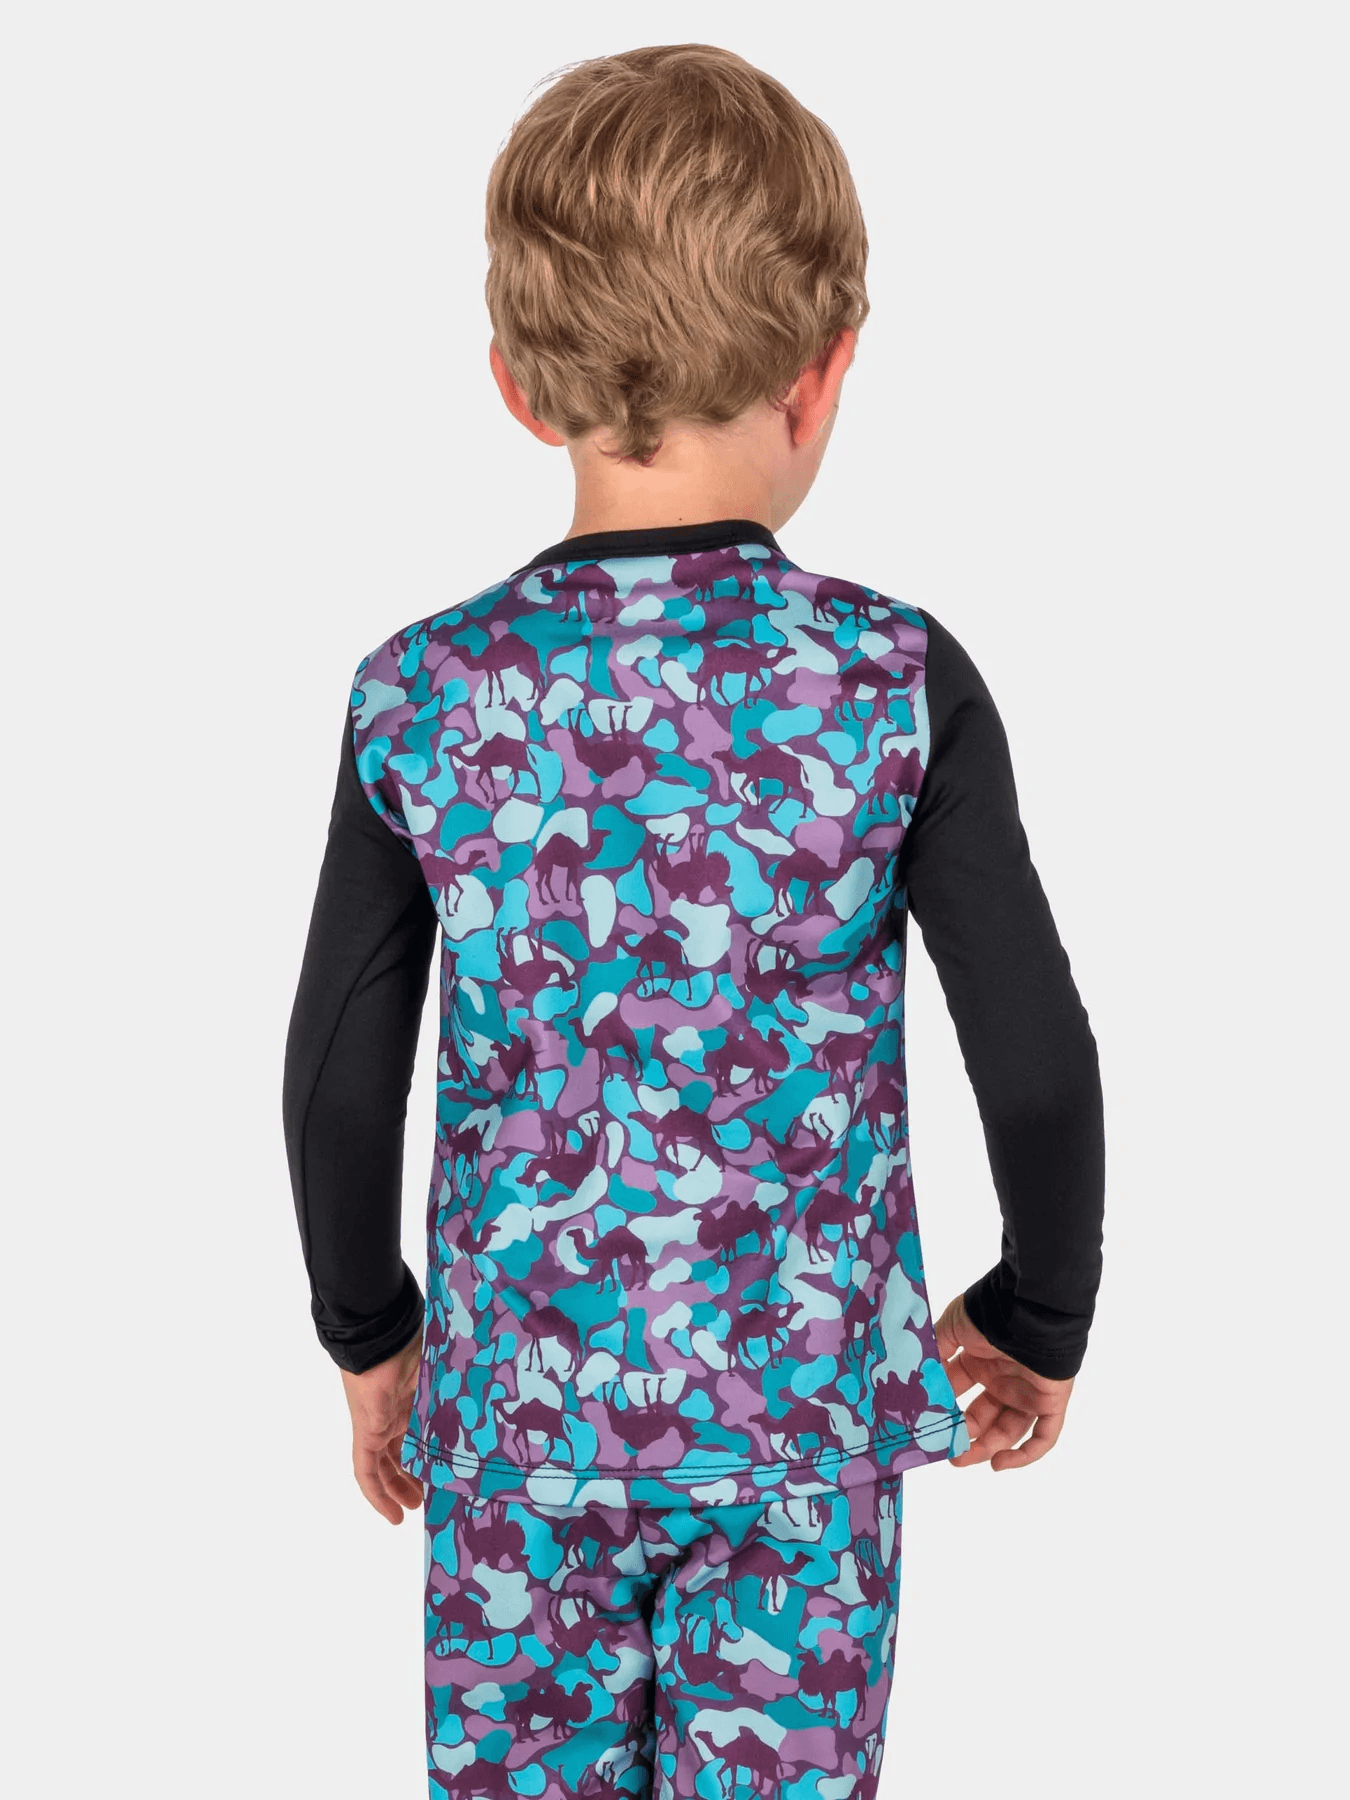 Blackstrap Kids Therma M/W Base Layer Crew 2022 - Mountain Kids Outfitters: Camelflauge Aquatic, Back View